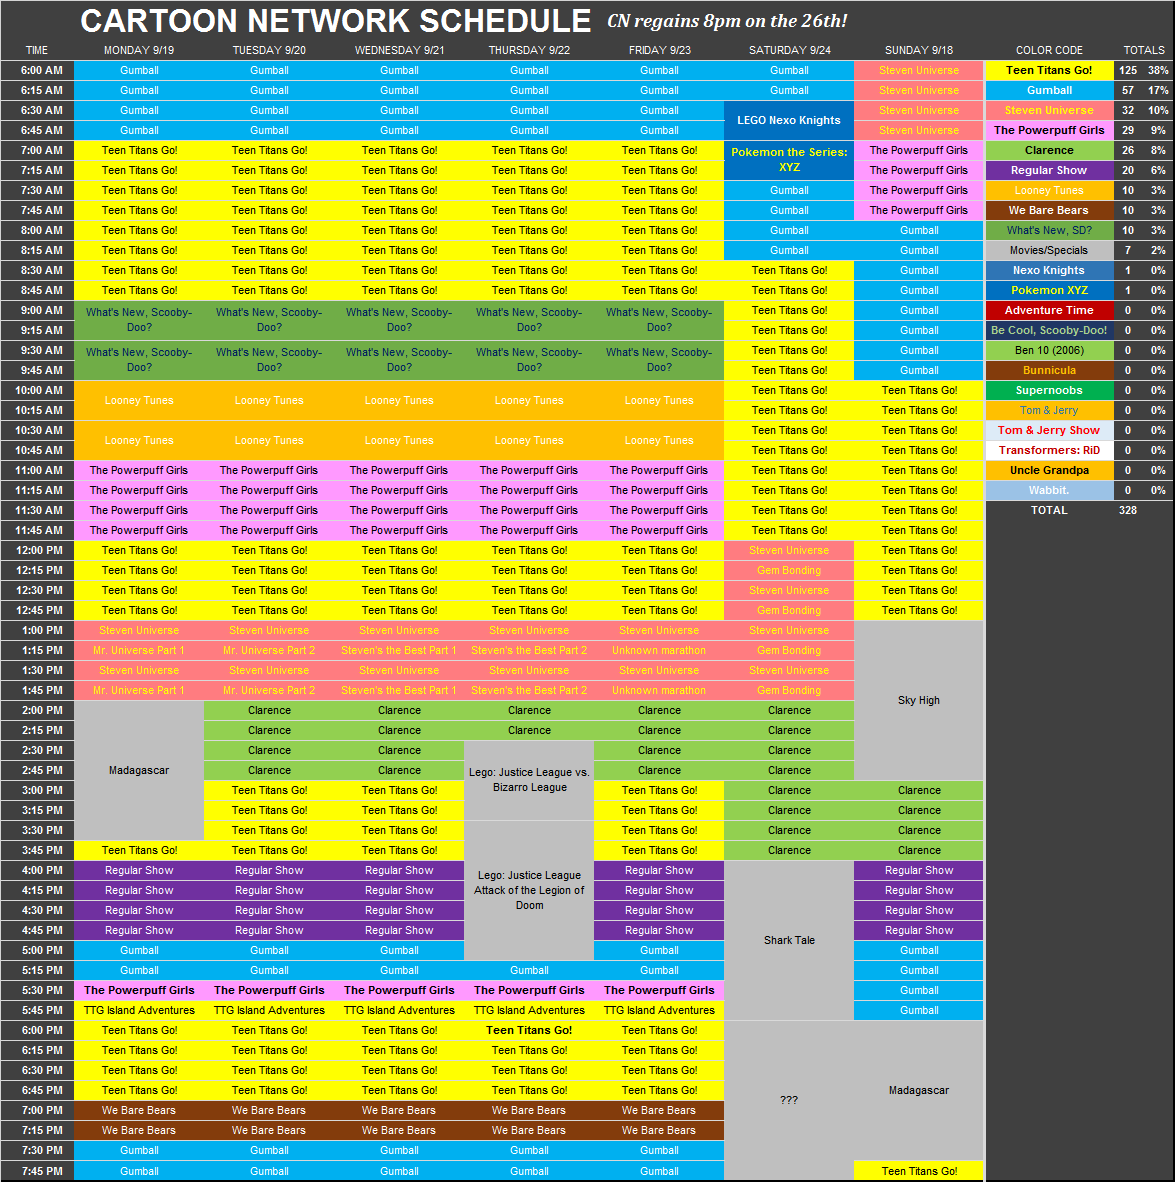 BoogsterSU2, This was the Cartoon Network schedule from...